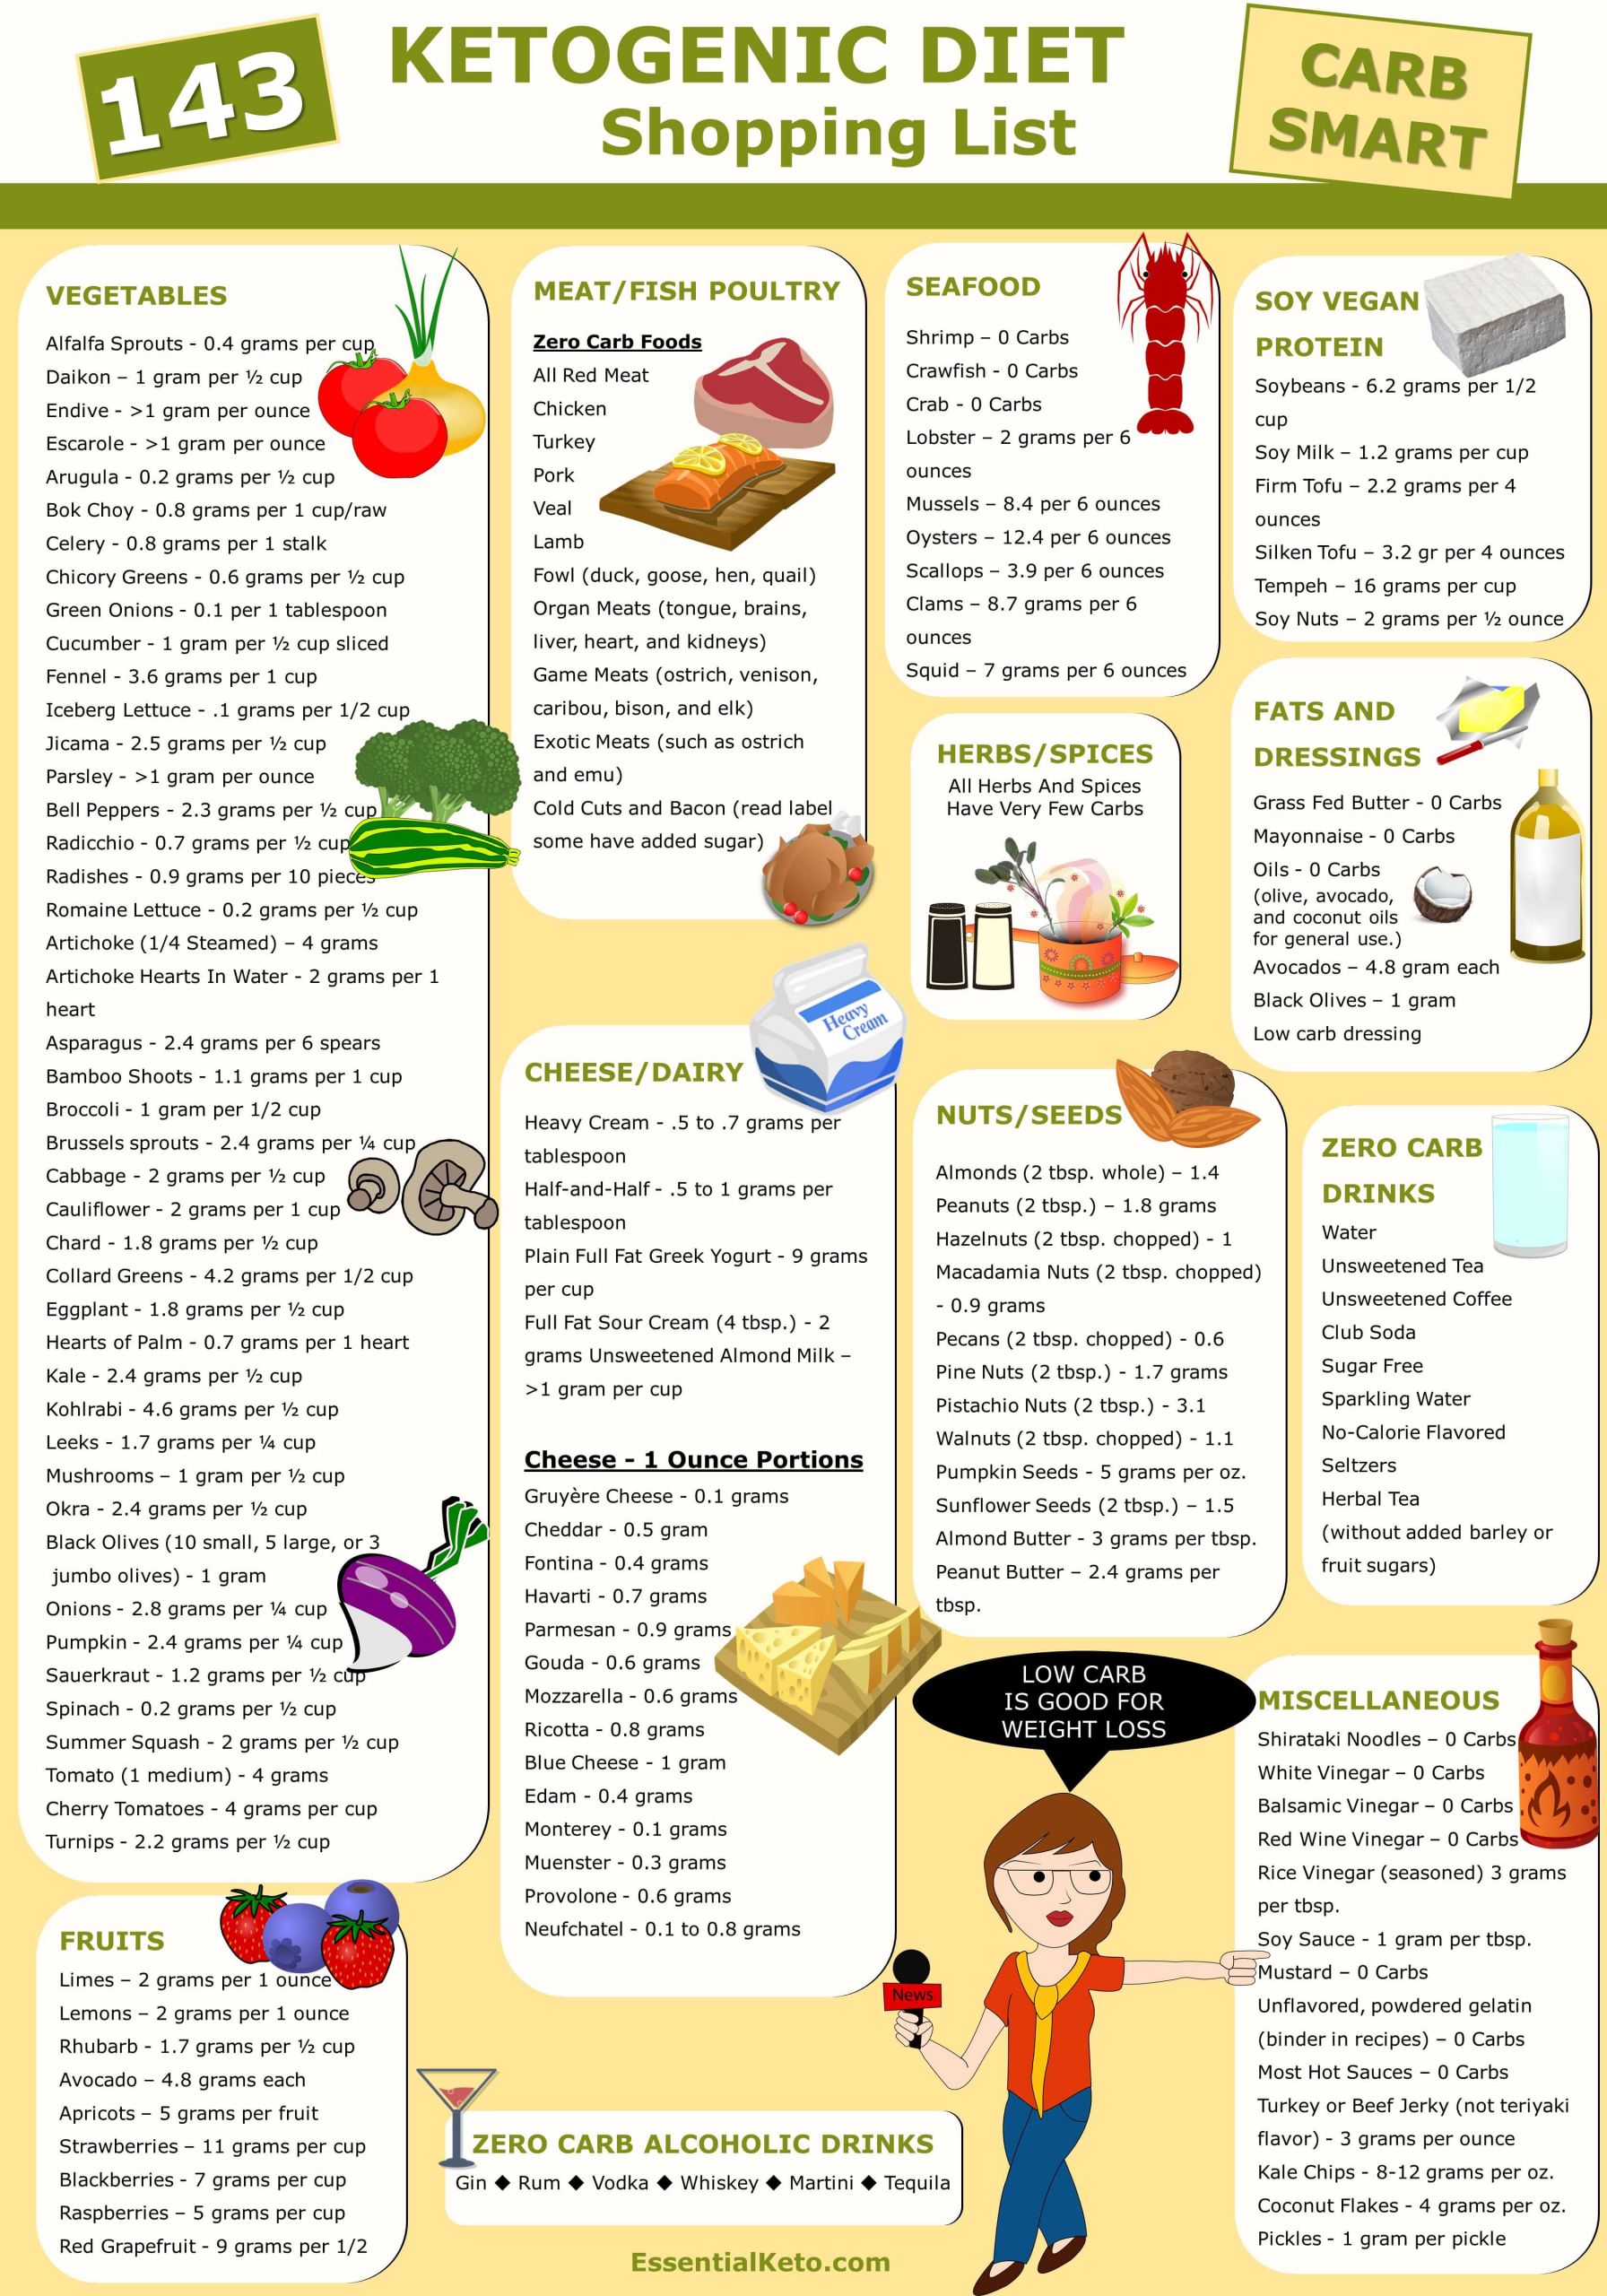 Keto Diet Foods To Eat
 What A Meal The Ketogenic Diet Looks Like